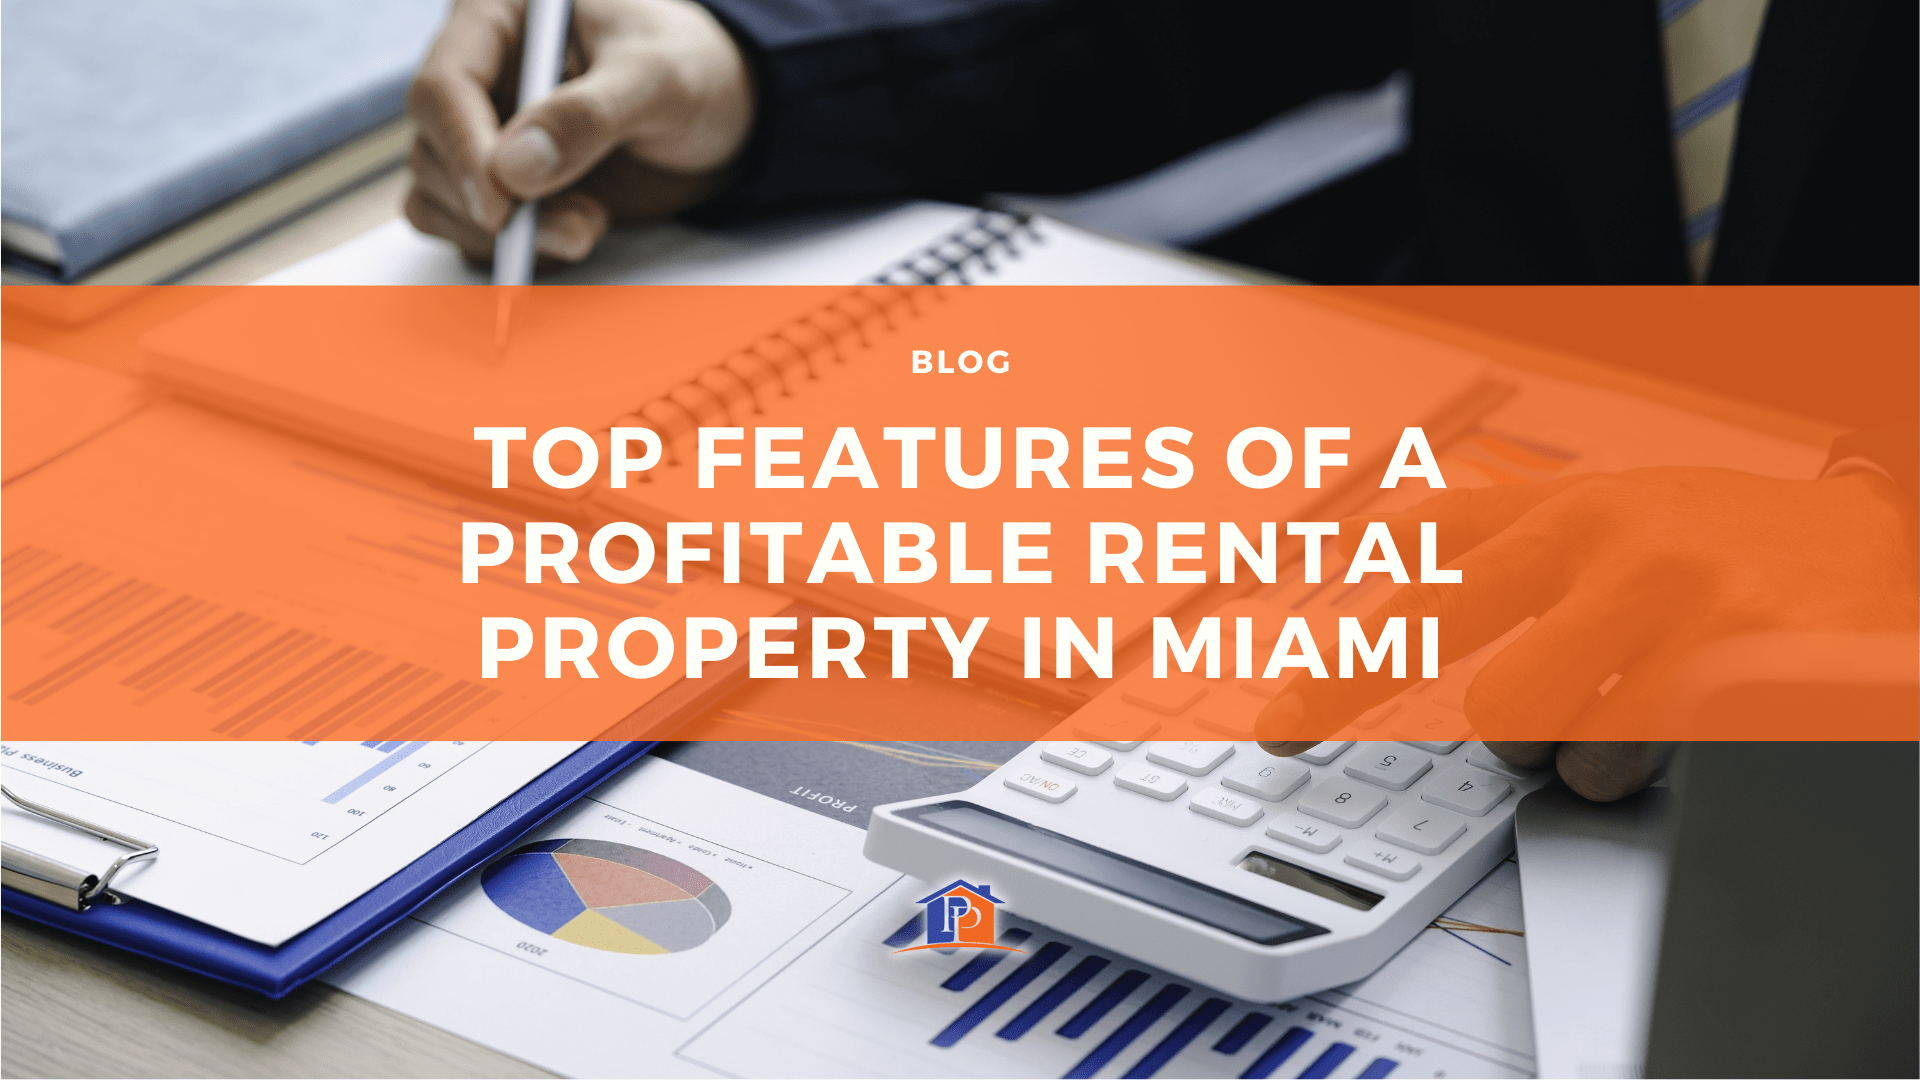 Top Features of a Profitable Rental Property in Miami